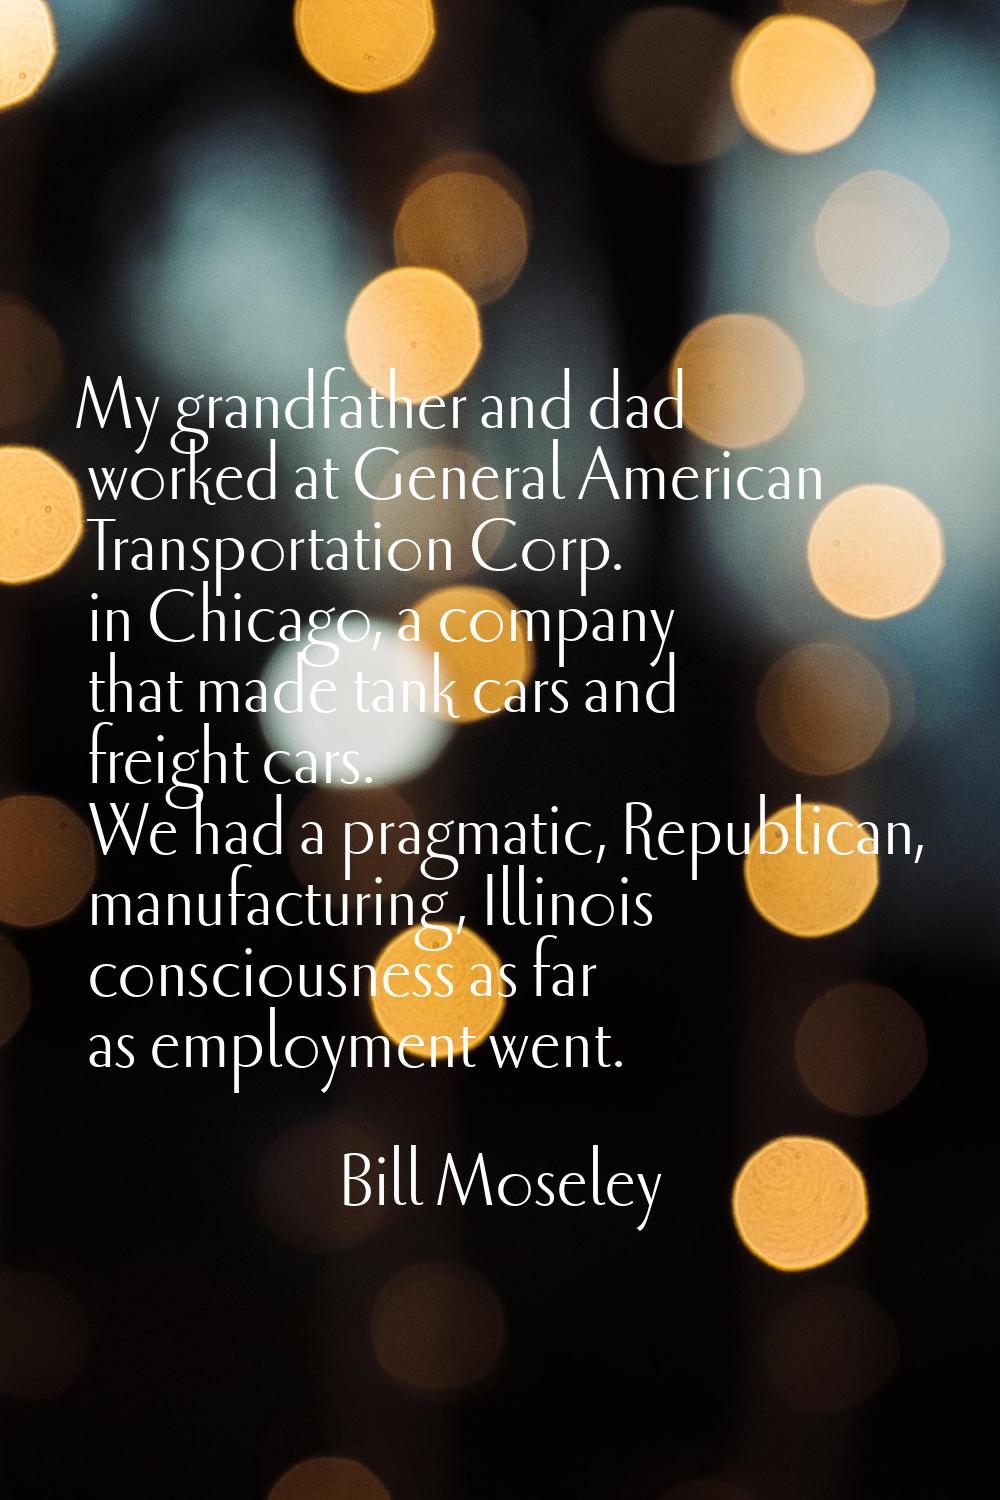 My grandfather and dad worked at General American Transportation Corp. in Chicago, a company that m